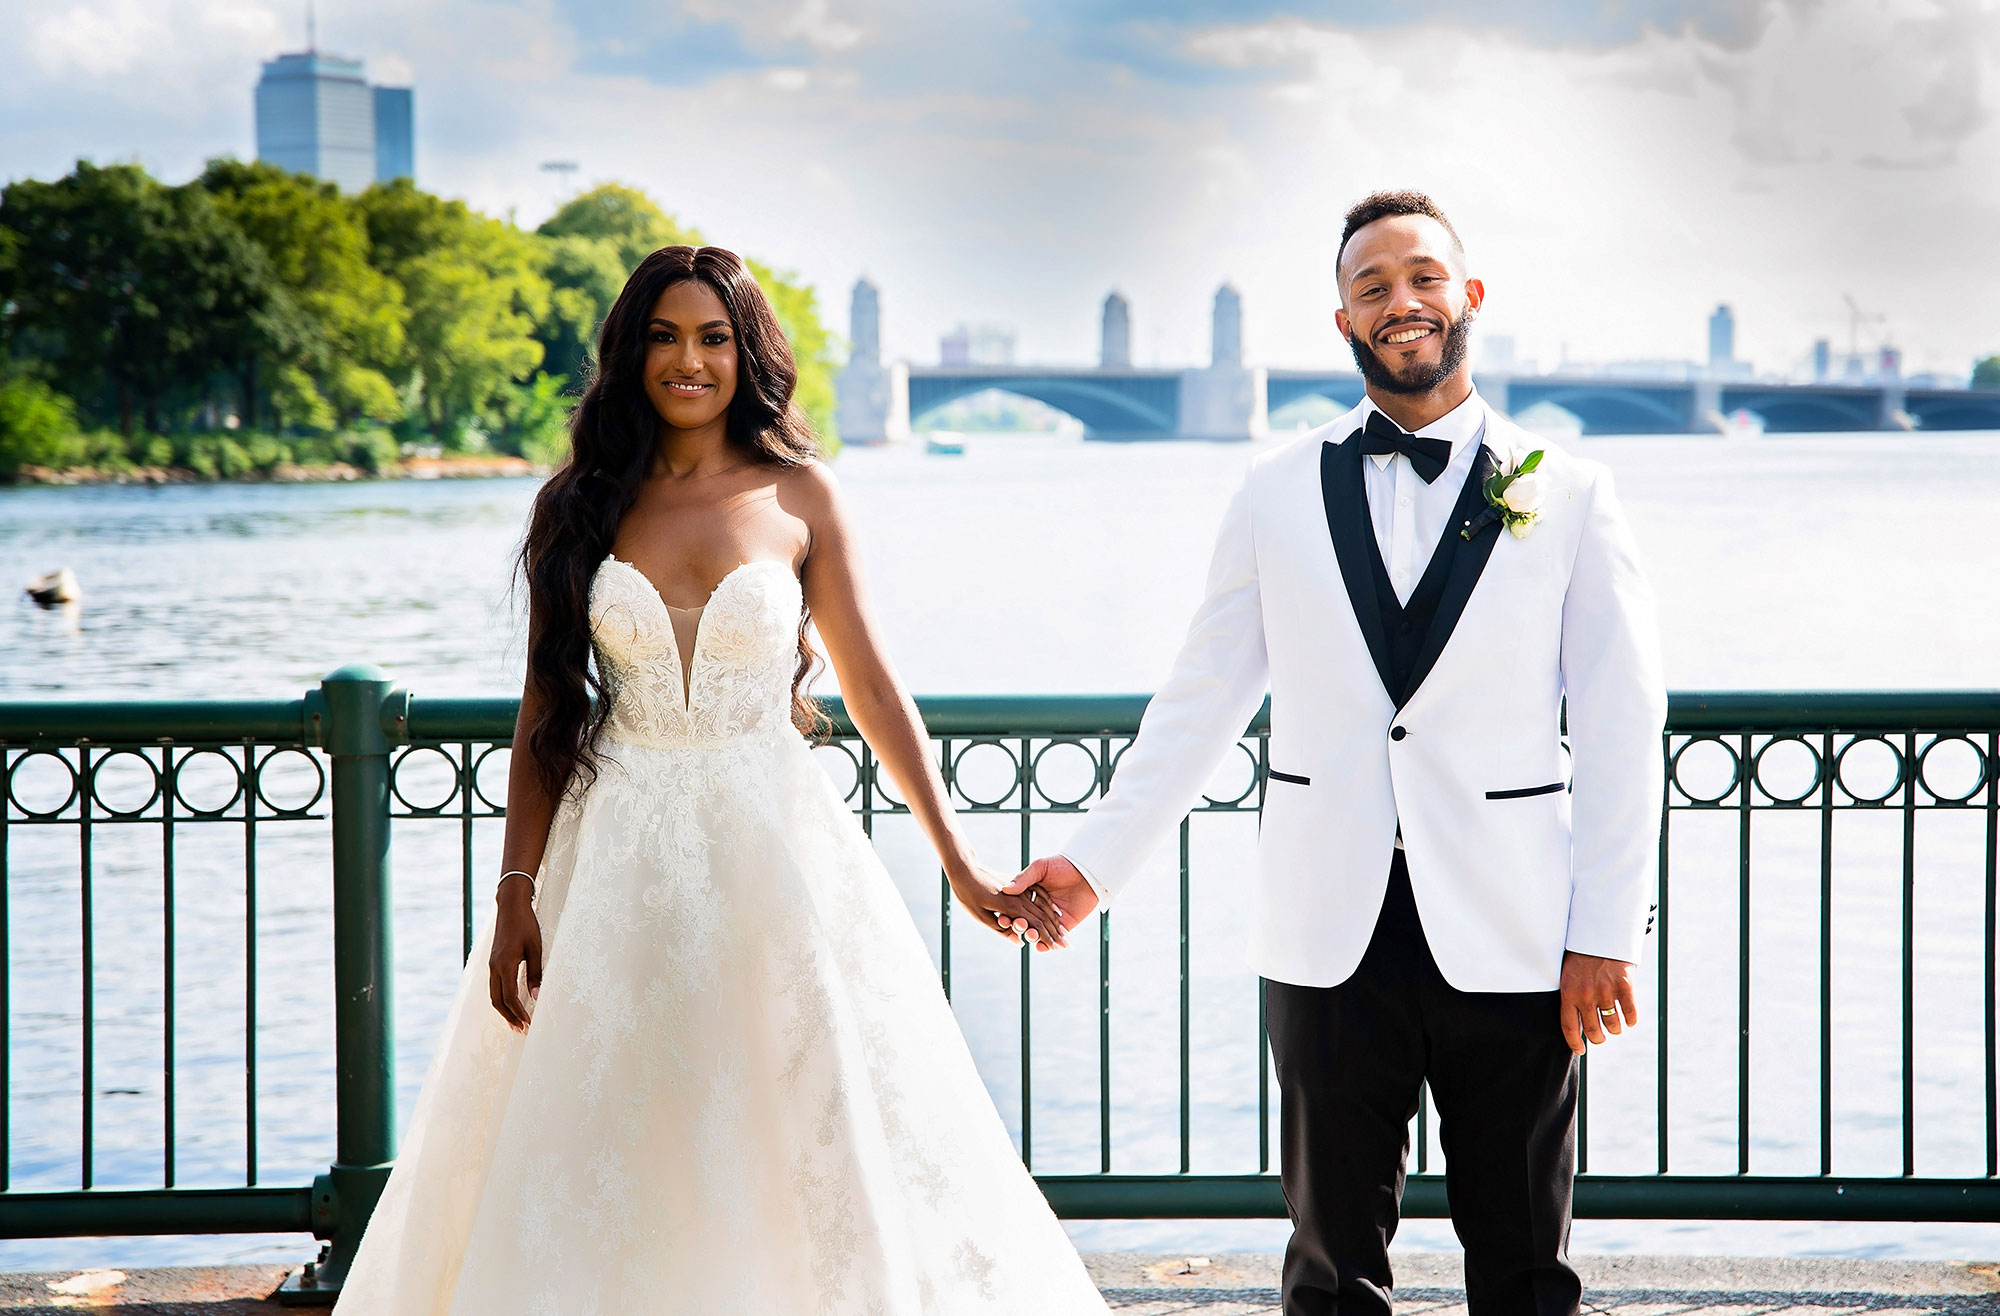 Married at First Sight' Season 14: See Cast Photos